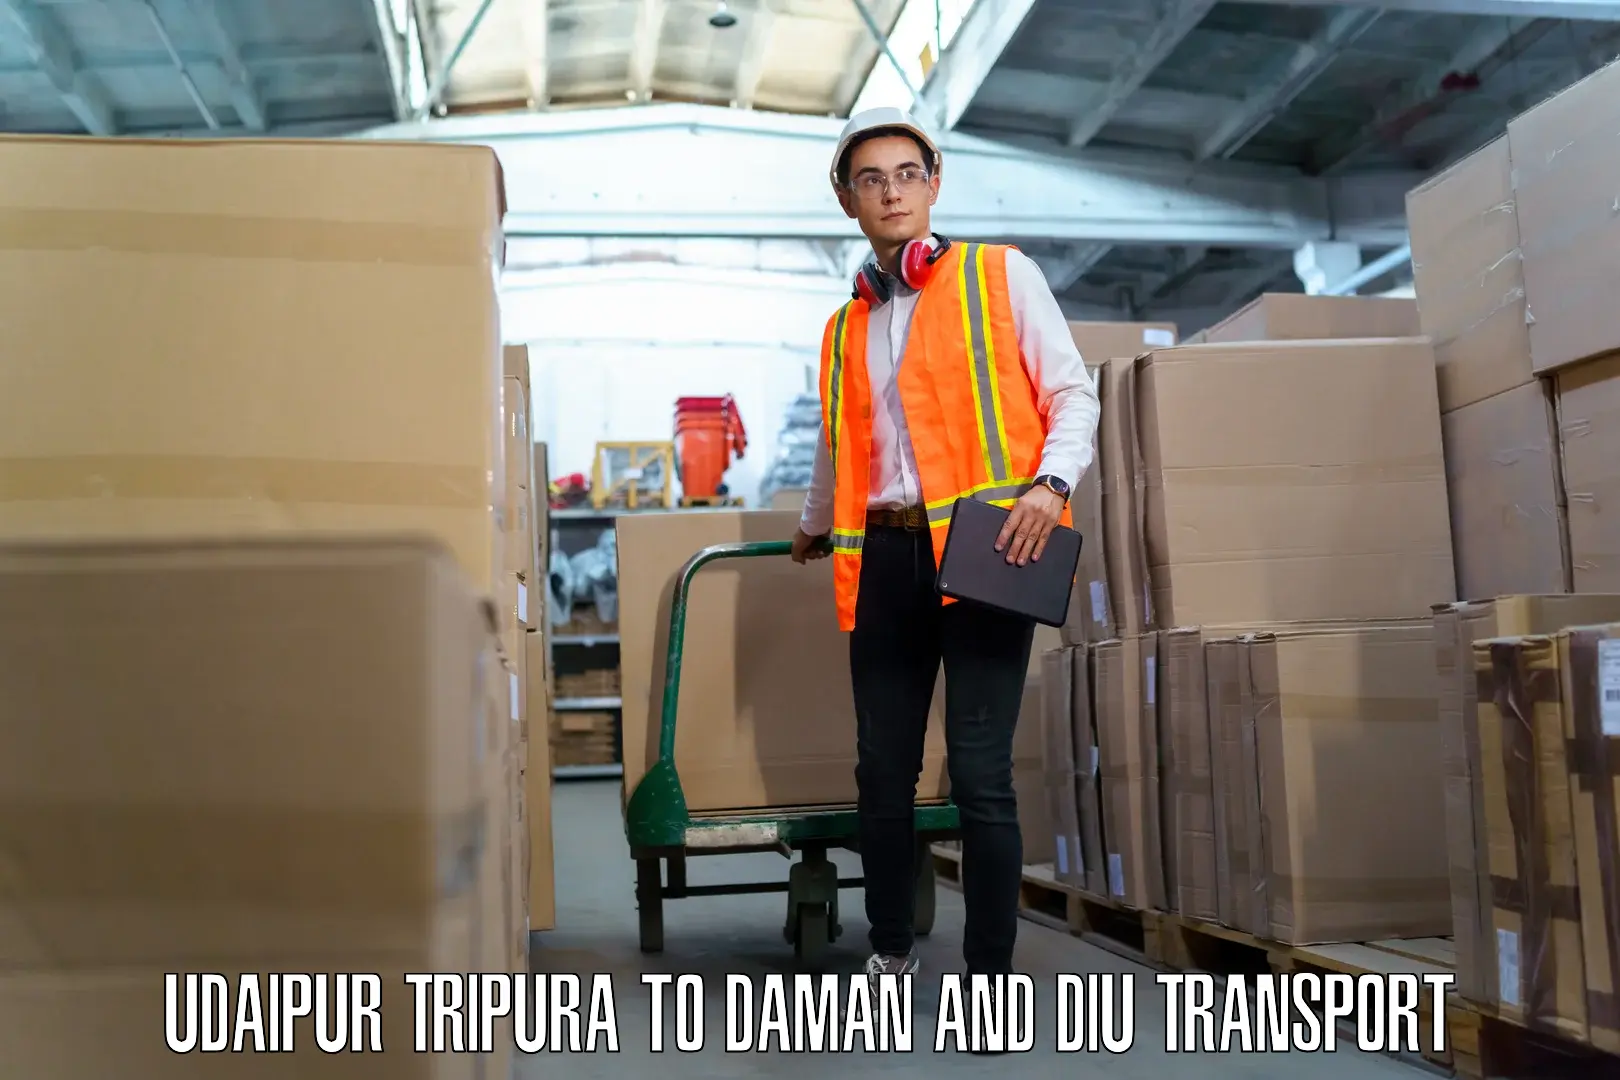 Daily parcel service transport Udaipur Tripura to Diu